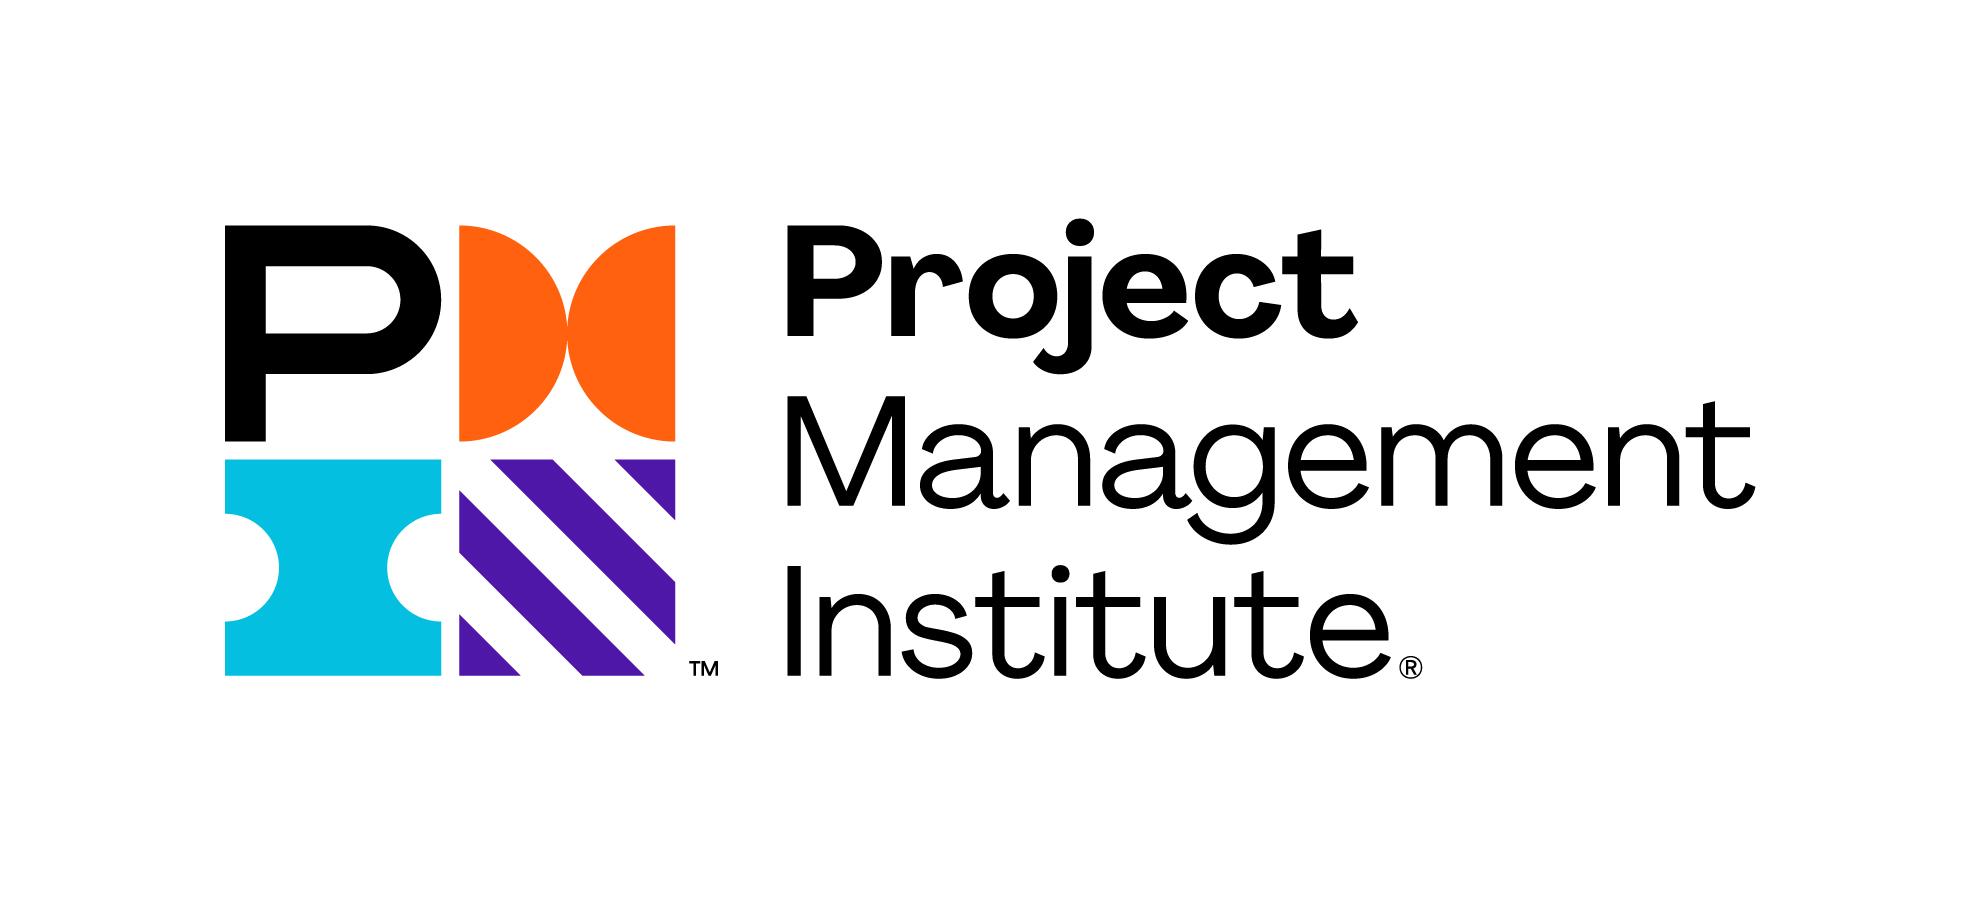 PMI is a global professional association for project management professionals. It offers certifications, such as the Project Management Professional (PMP) and the Certified Associate in Project Management (CAPM), and provides various resources, standards, and networking opportunities for individuals in the field of project management.